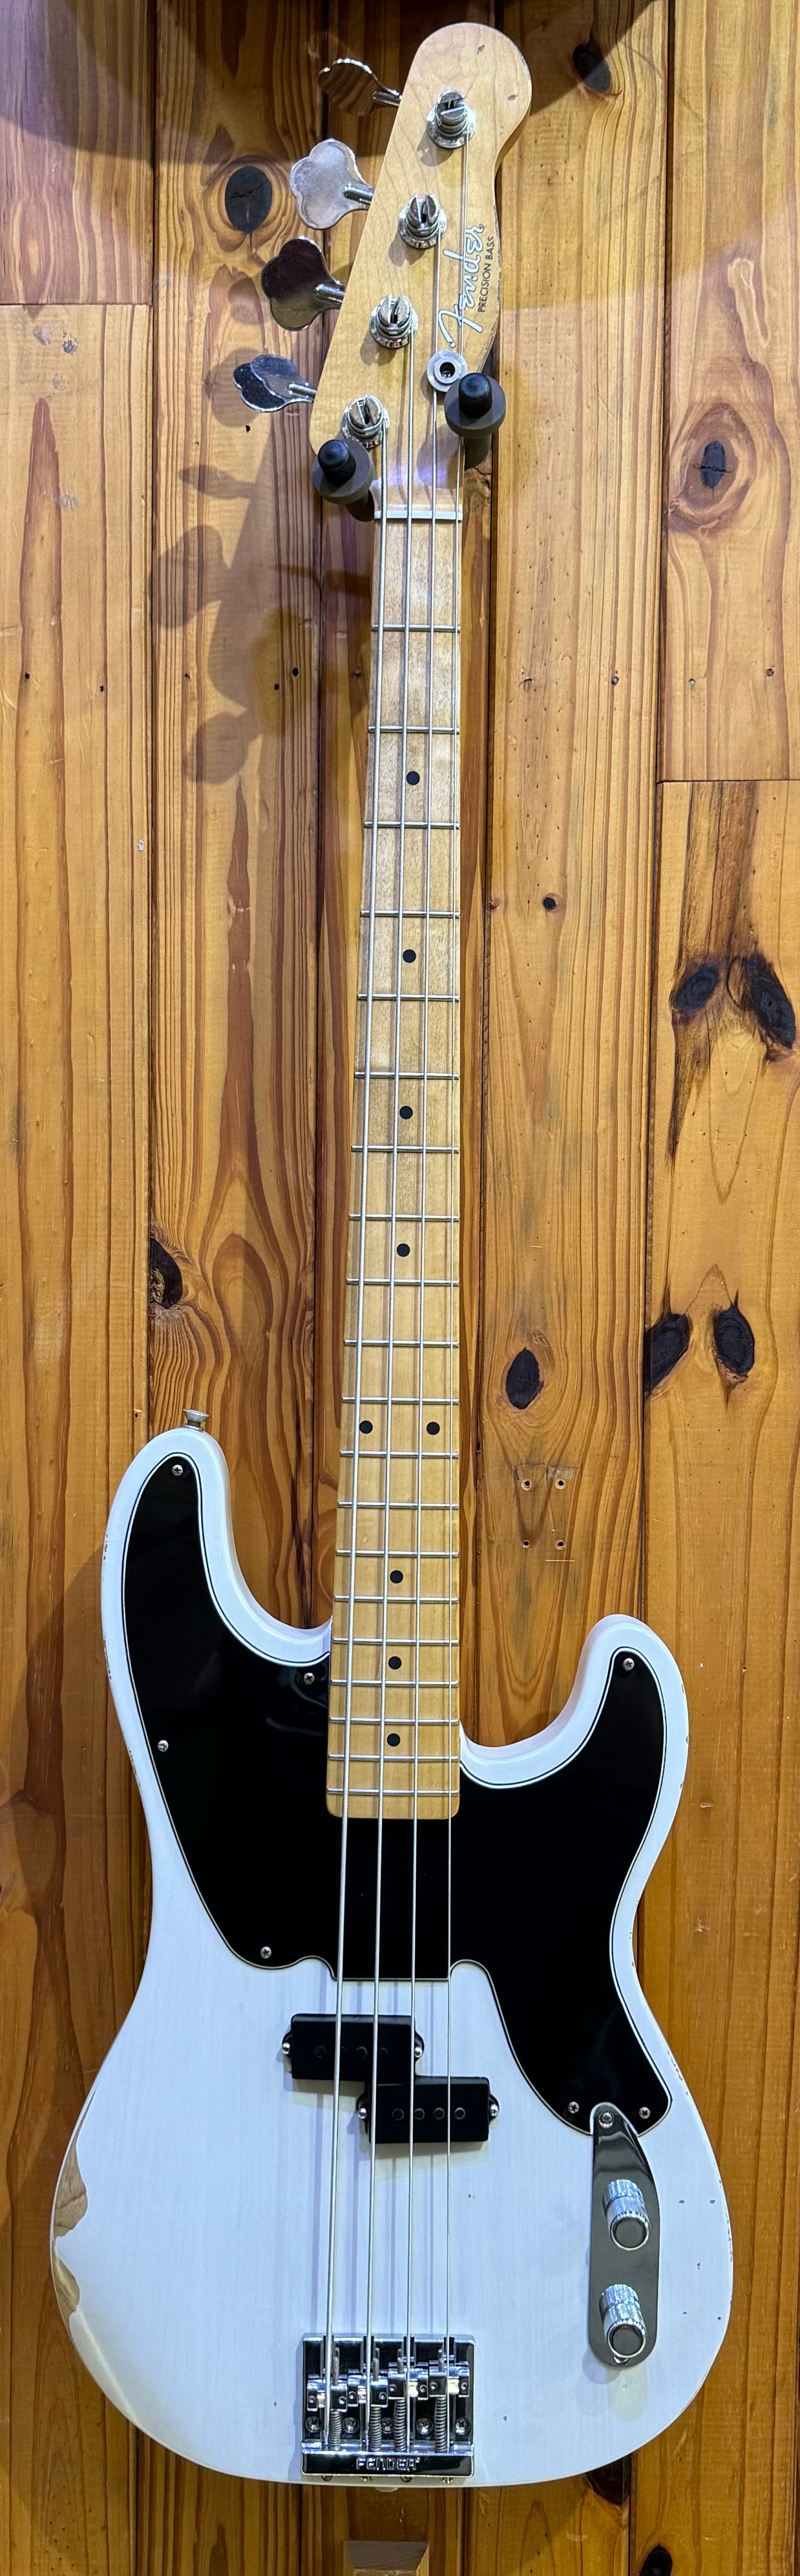 Fender Mike Dirnt Road Worn Precision Bass - White Blonde - Pre-Loved